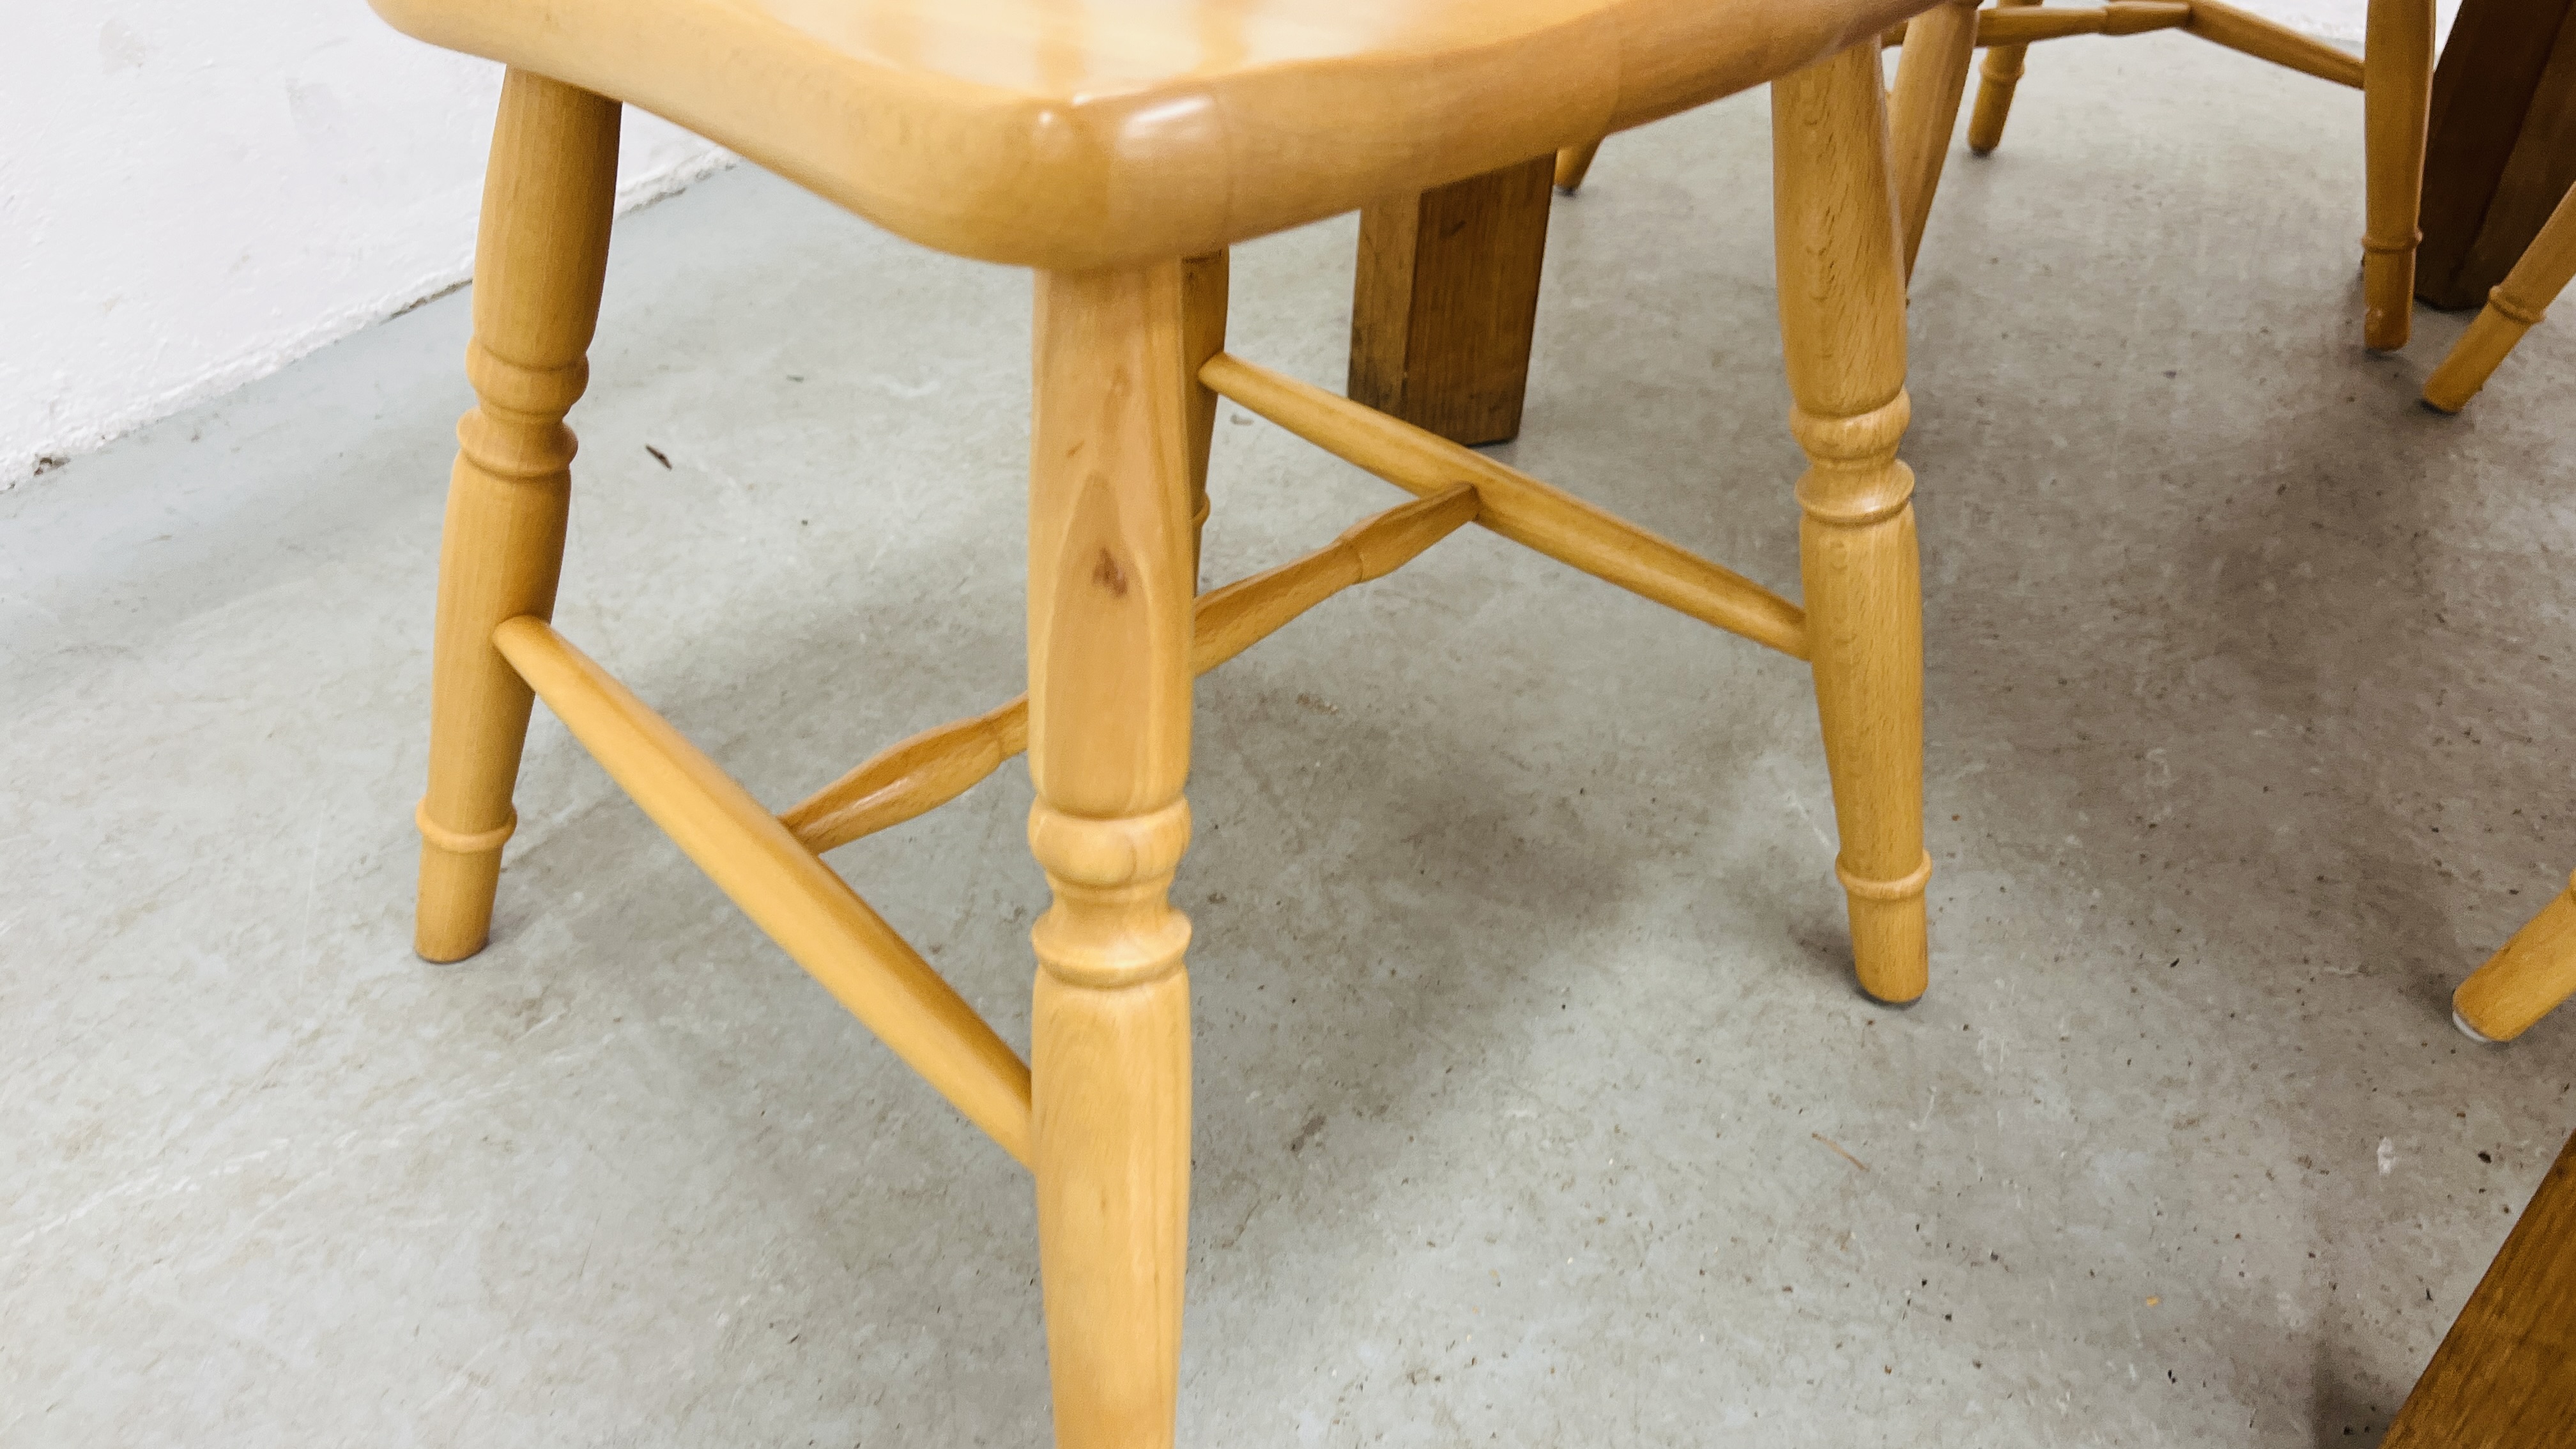 A SOLID OAK EXTENDING DINING TABLE ALONG WITH A SET OF FOUR BEECH WOOD DINING CHAIRS - Image 10 of 14